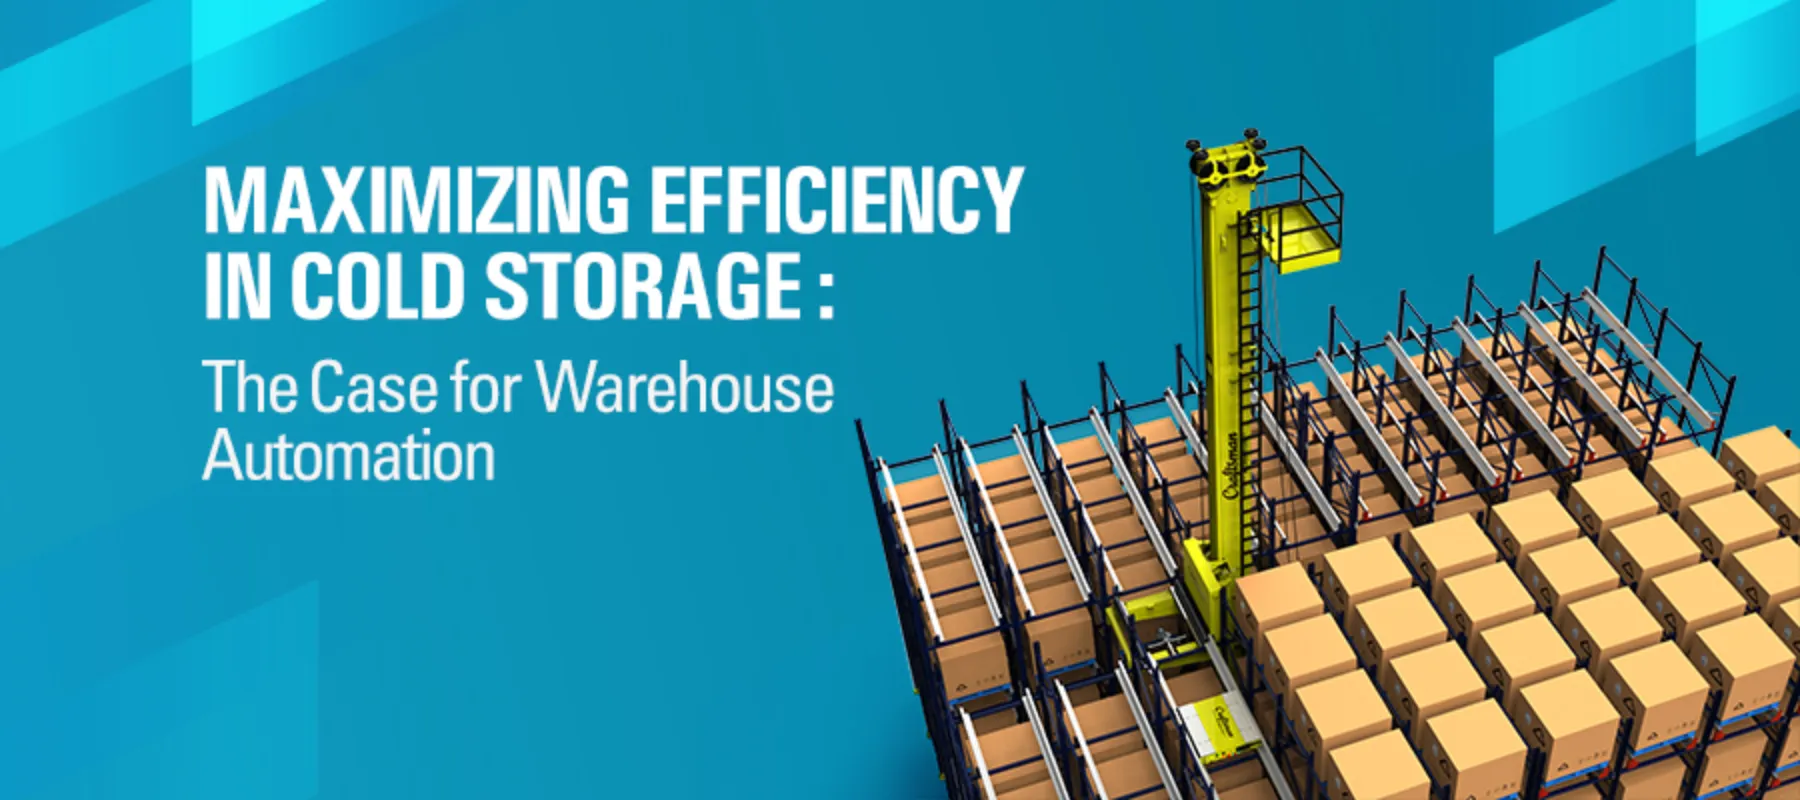  Maximizing Efficiency in Cold Storage: The Case for Warehouse Automation